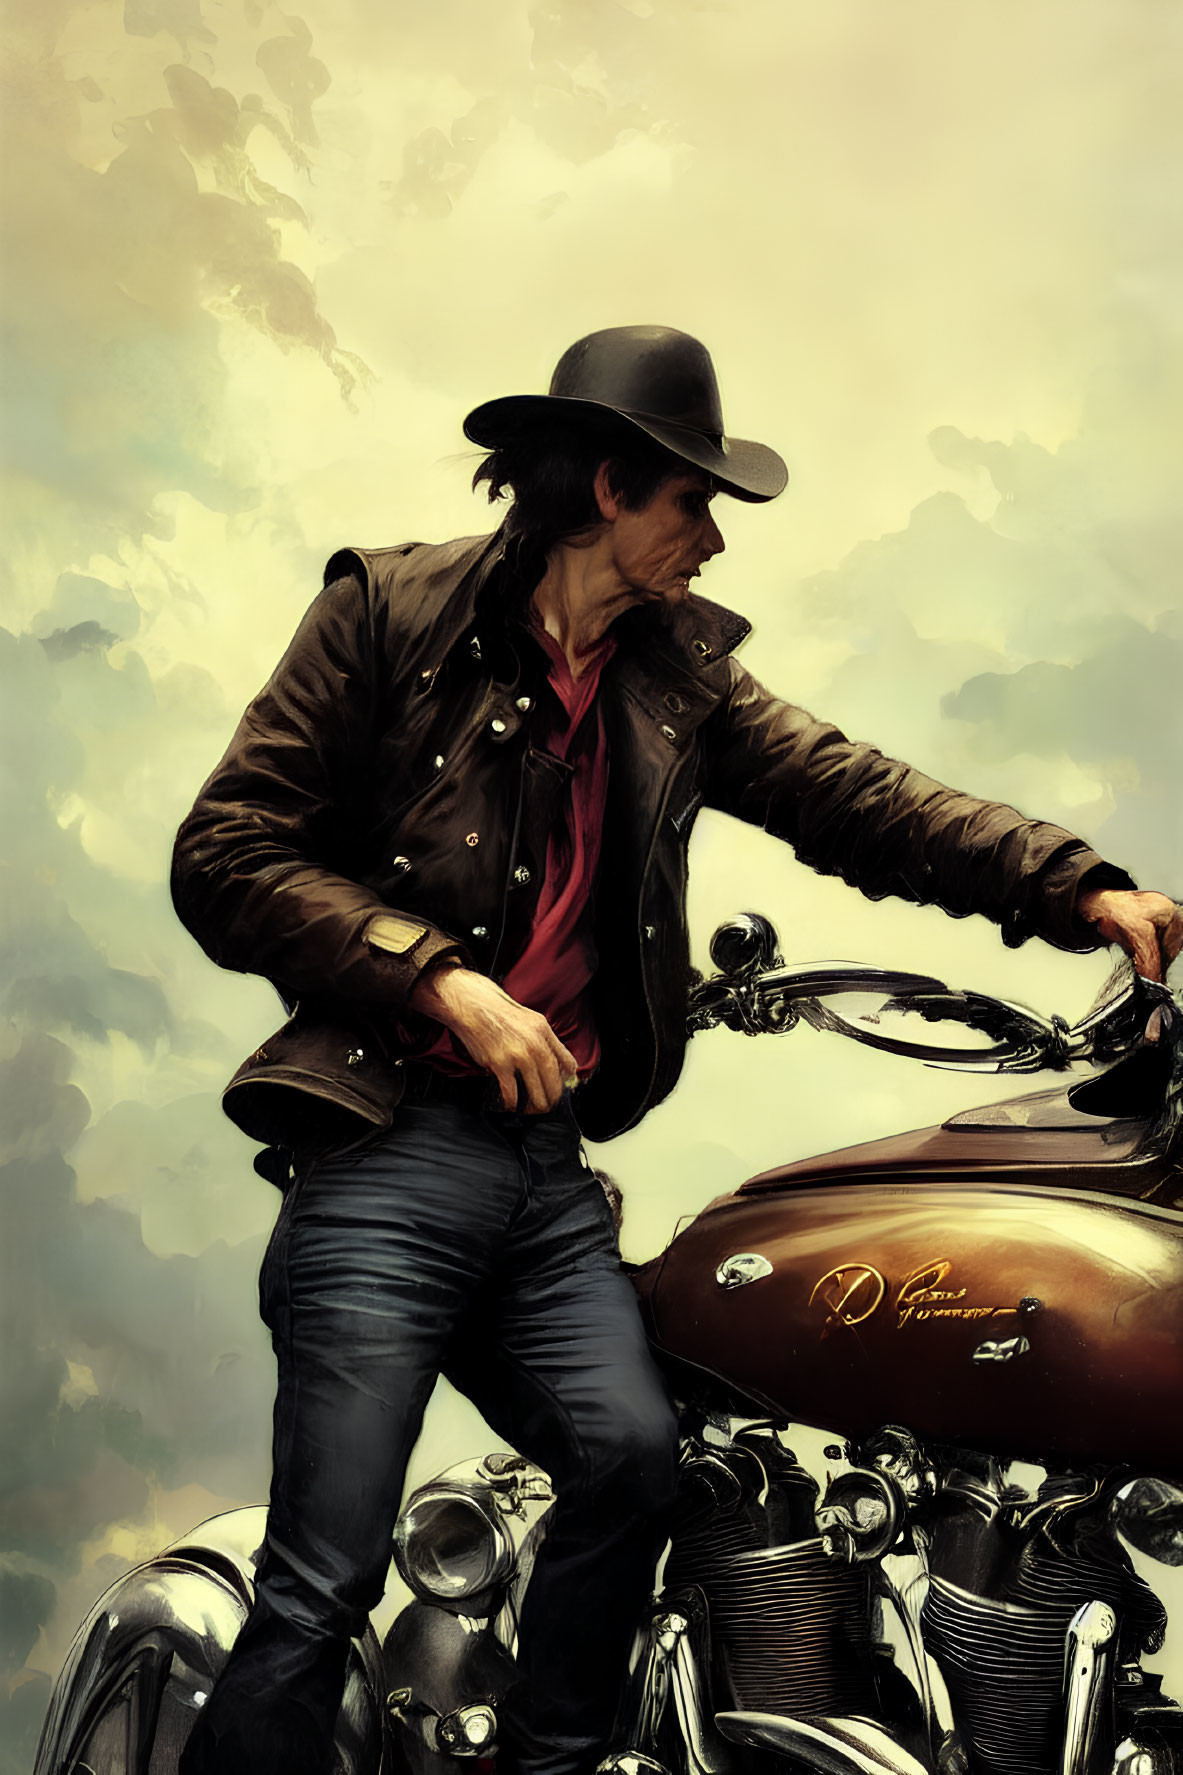 Man in black hat and leather jacket leaning on vintage motorcycle under cloudy sky.